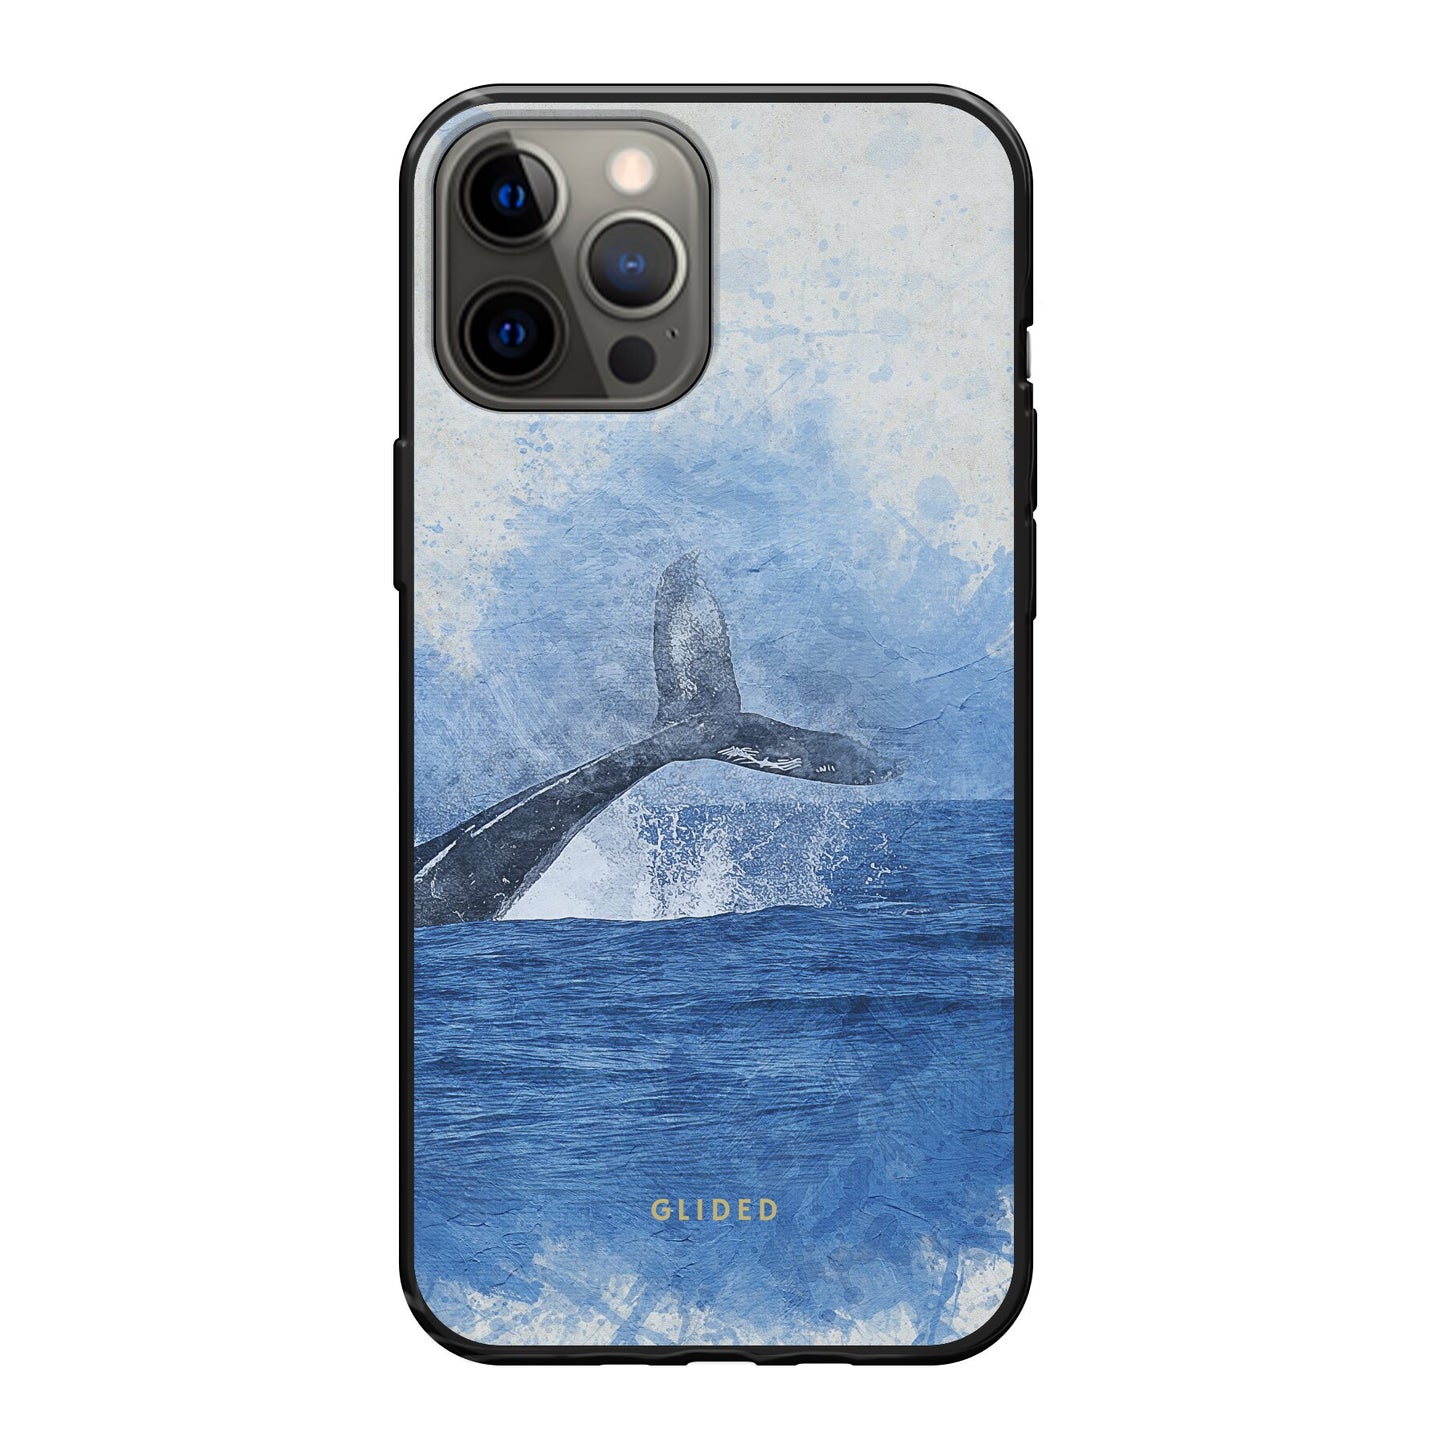 Oceanic - iPhone 12 Pro Max Handyhülle Soft case